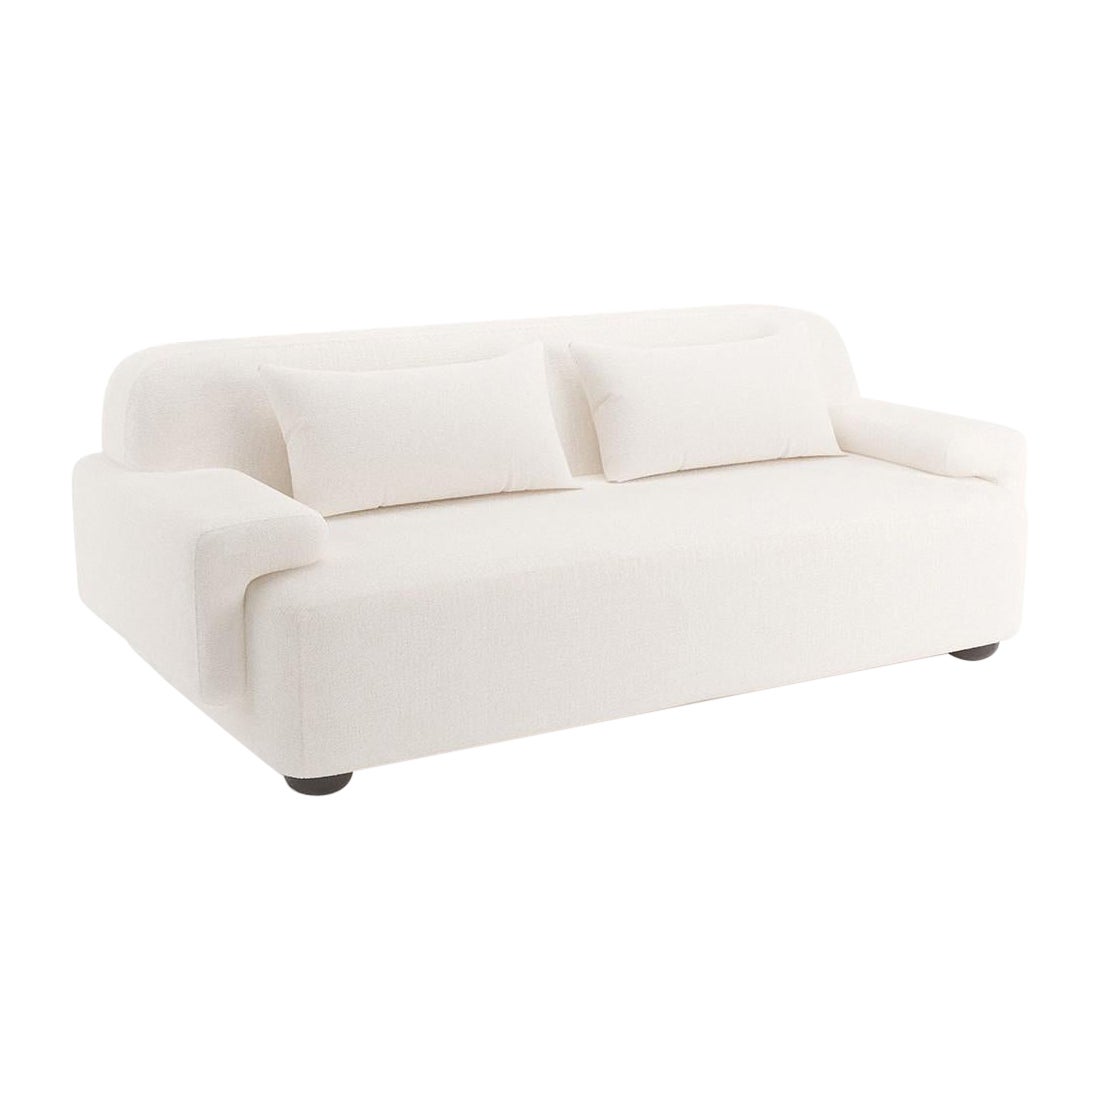 Popus Editions Lena 2.5 Seater Sofa in Egg Shell Off-white Malmoe Terry Fabric